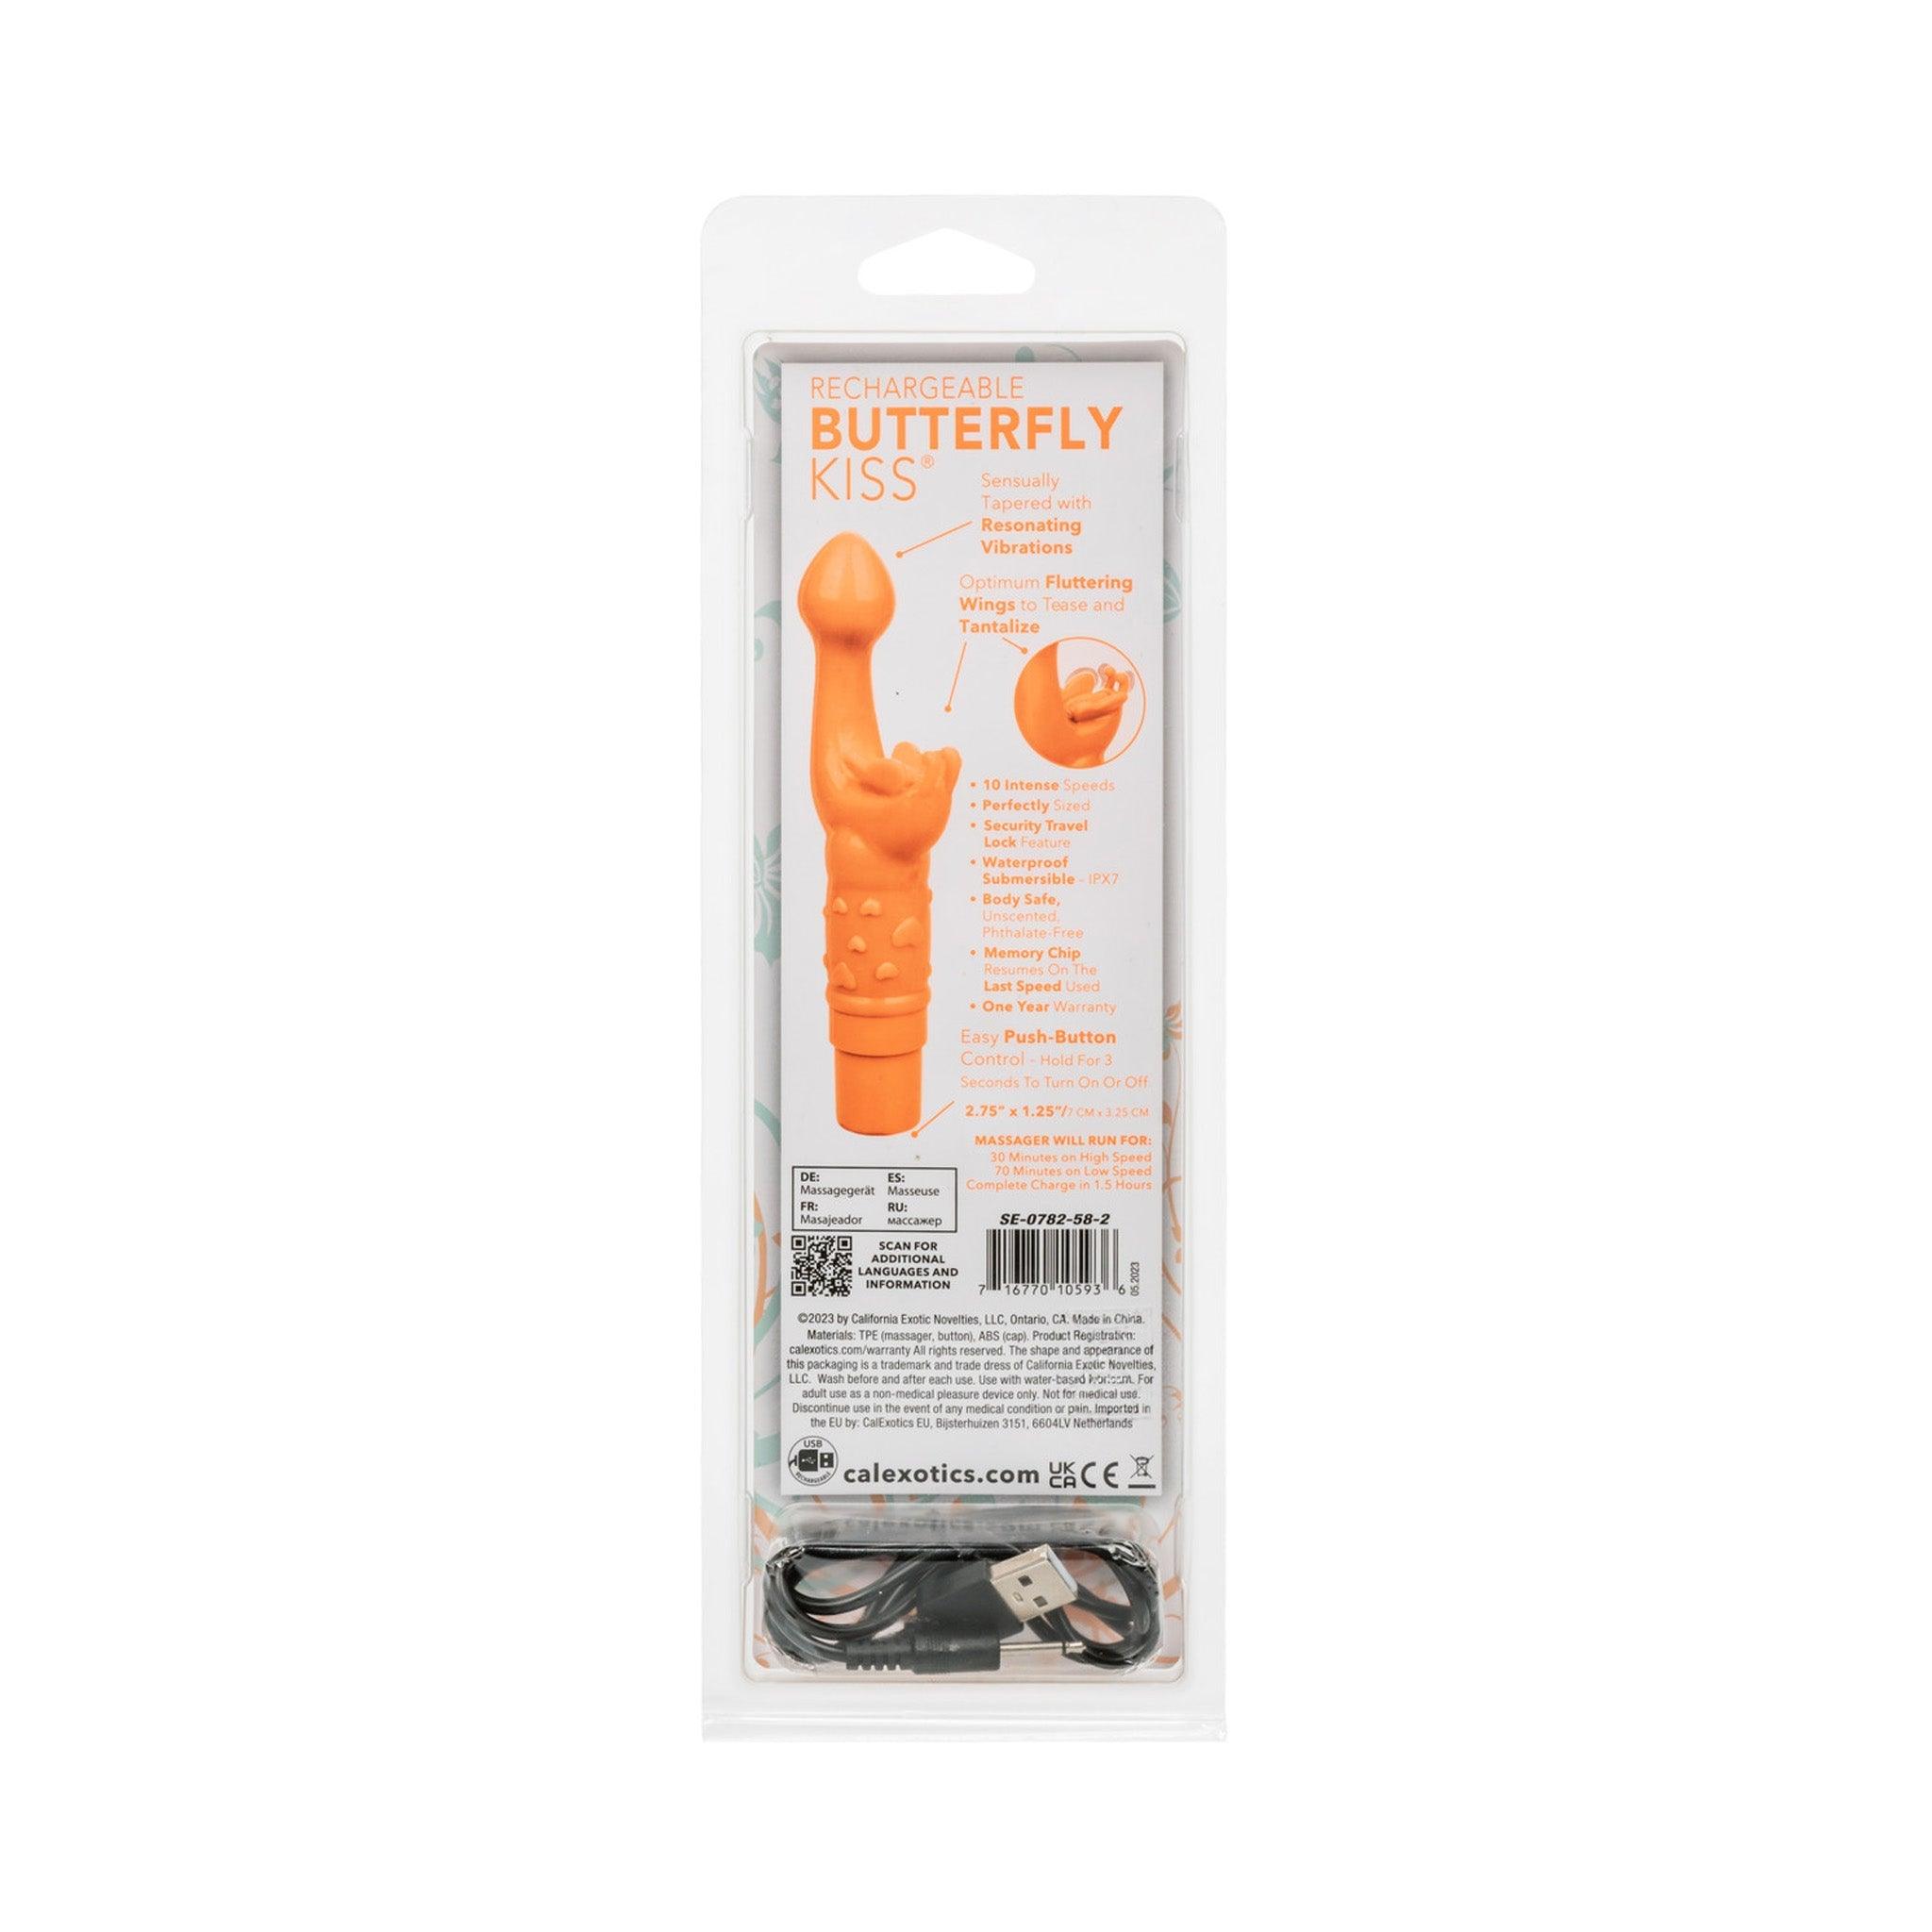 Rechargeable Butterfly Kiss Vibrating and Fluttering - Orange - CheapLubes.com